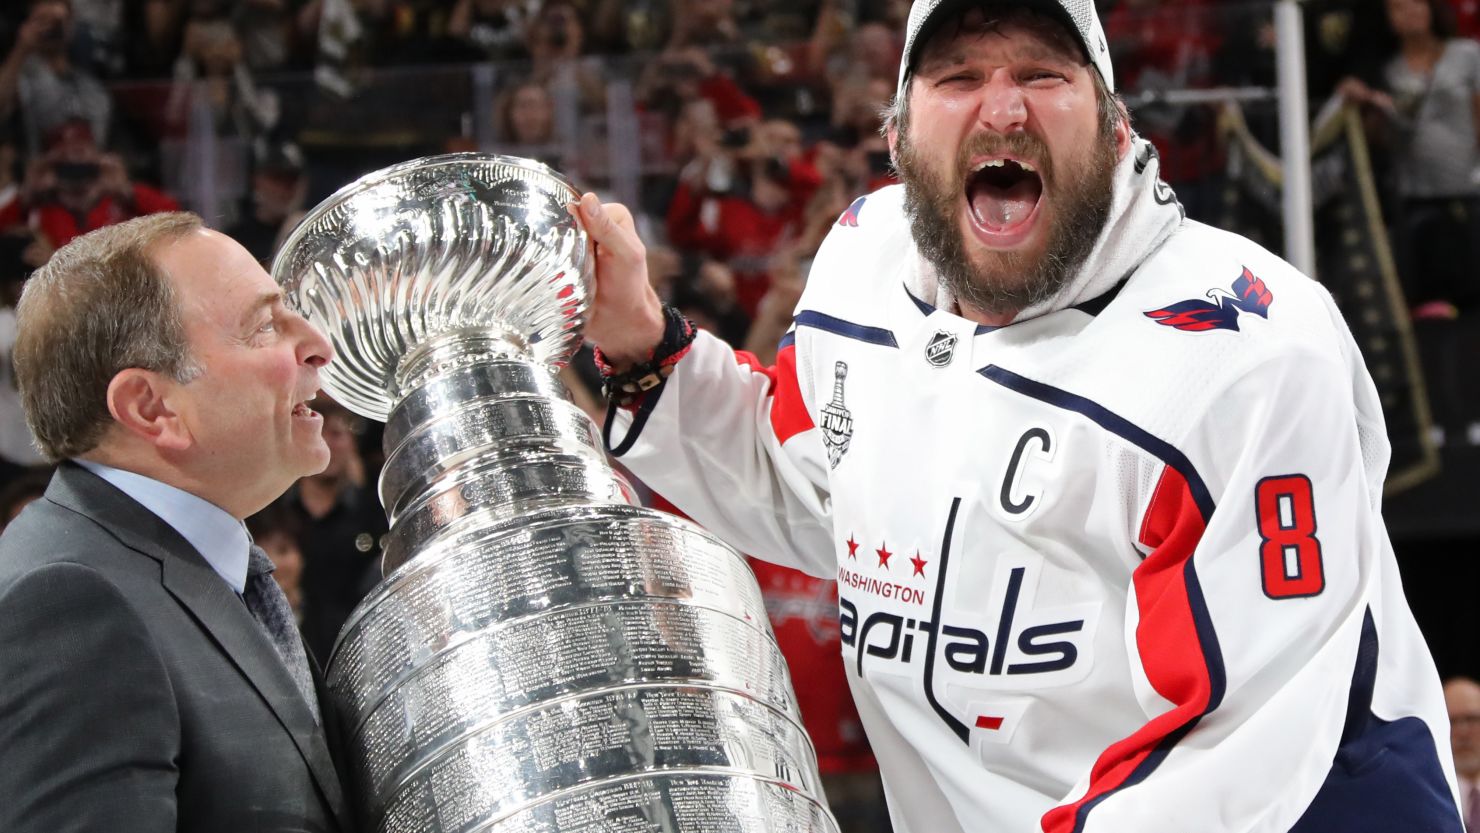 Alex Ovechkin #8 of the Washington Capitals is presented the Stanley Cup by NHL Commissioner Gary Bettman after his team defeated the Vegas Golden Knights 4-3 in Game Five of the 2018 NHL Stanley Cup Final at T-Mobile Arena on June 7, 2018 in Las Vegas, Nevada. (Photo by Bruce Bennett/Getty Images)